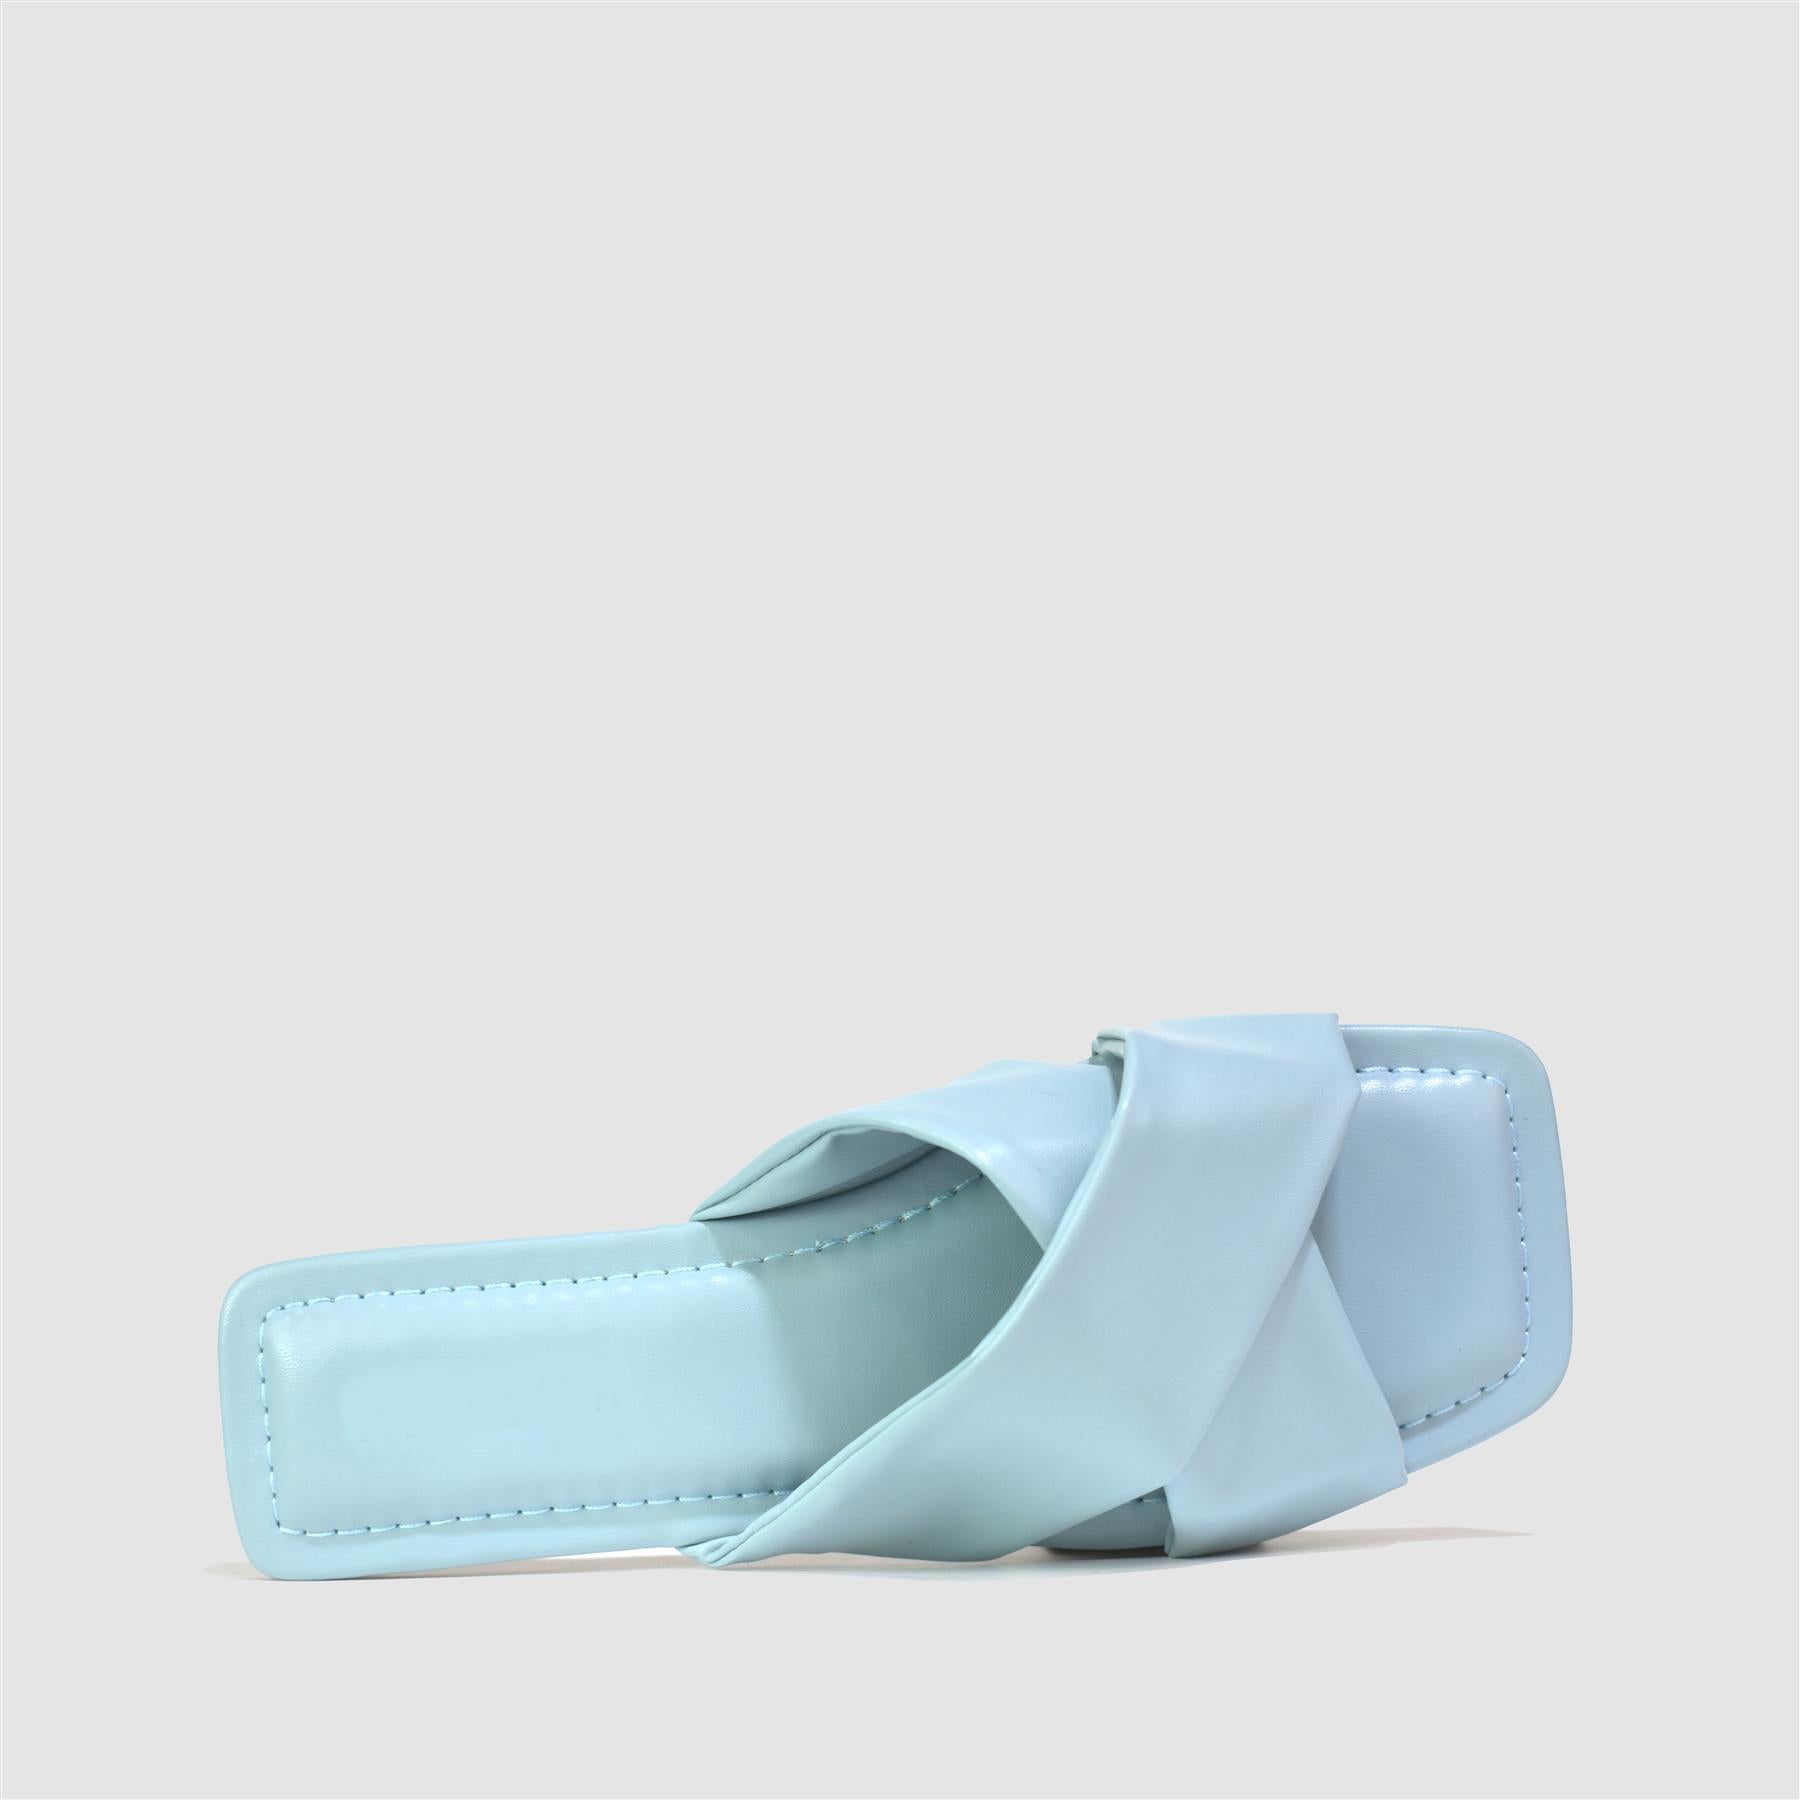 Soft Crossover Sandals in Blue